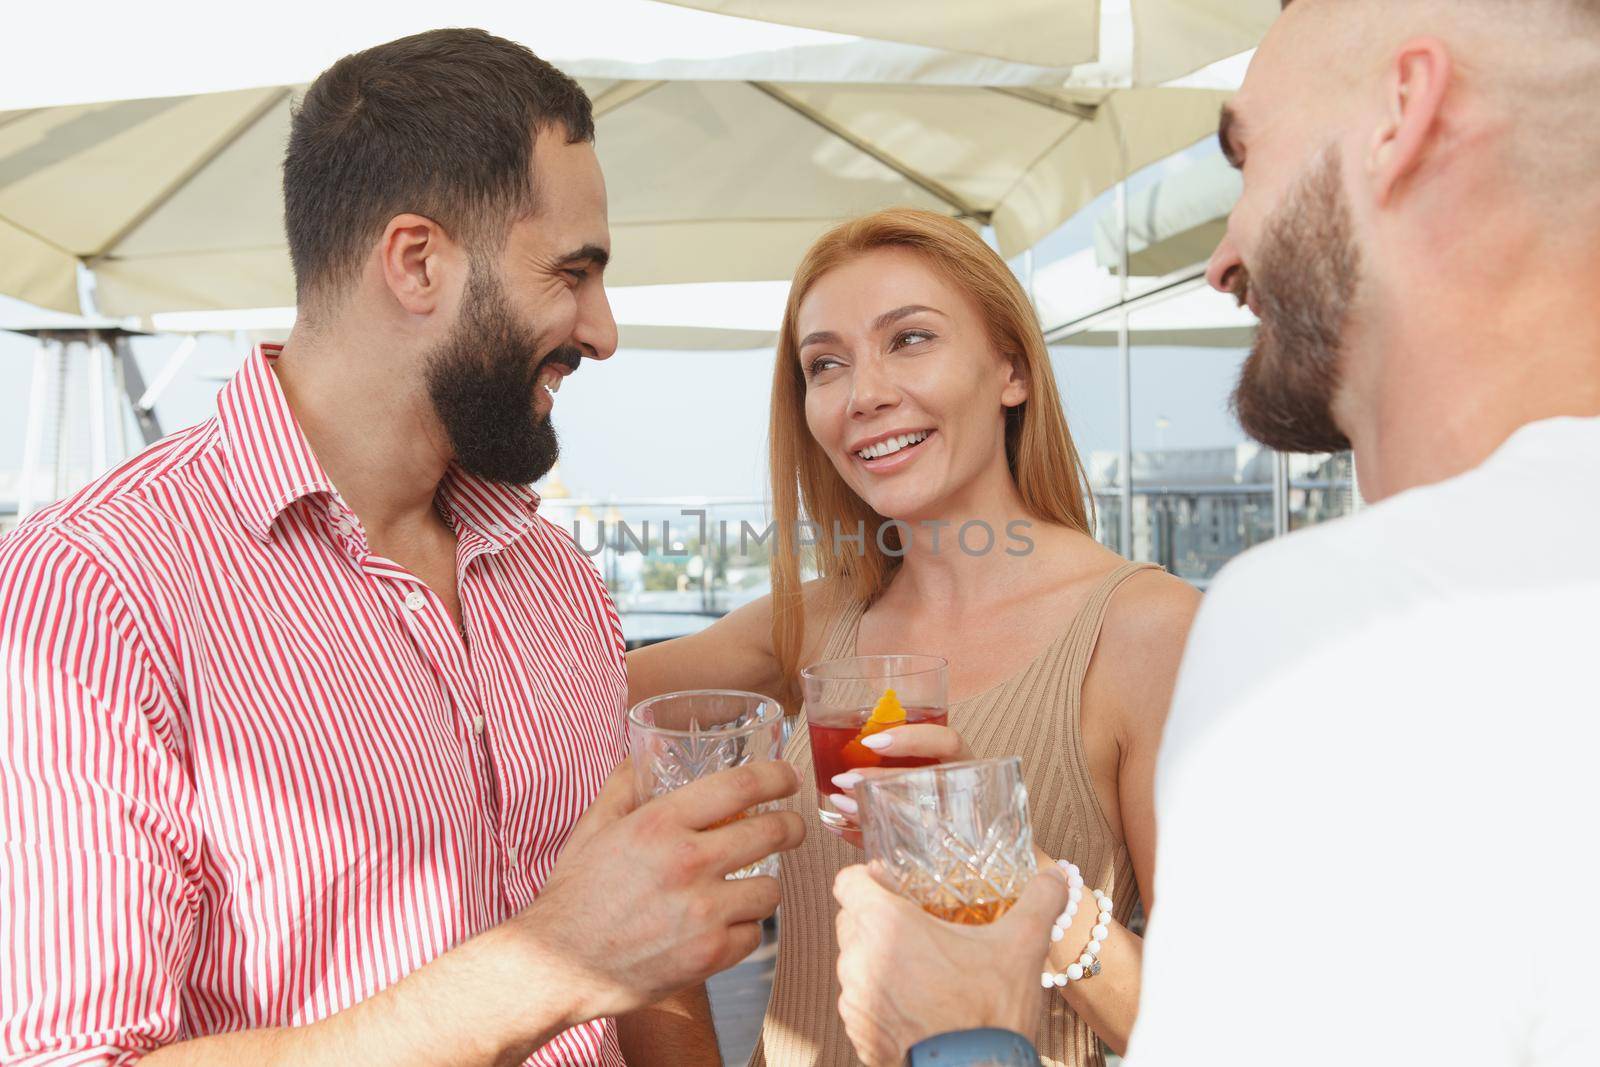 Beautiful woman talking to her male friends over drinks on a rooftop party